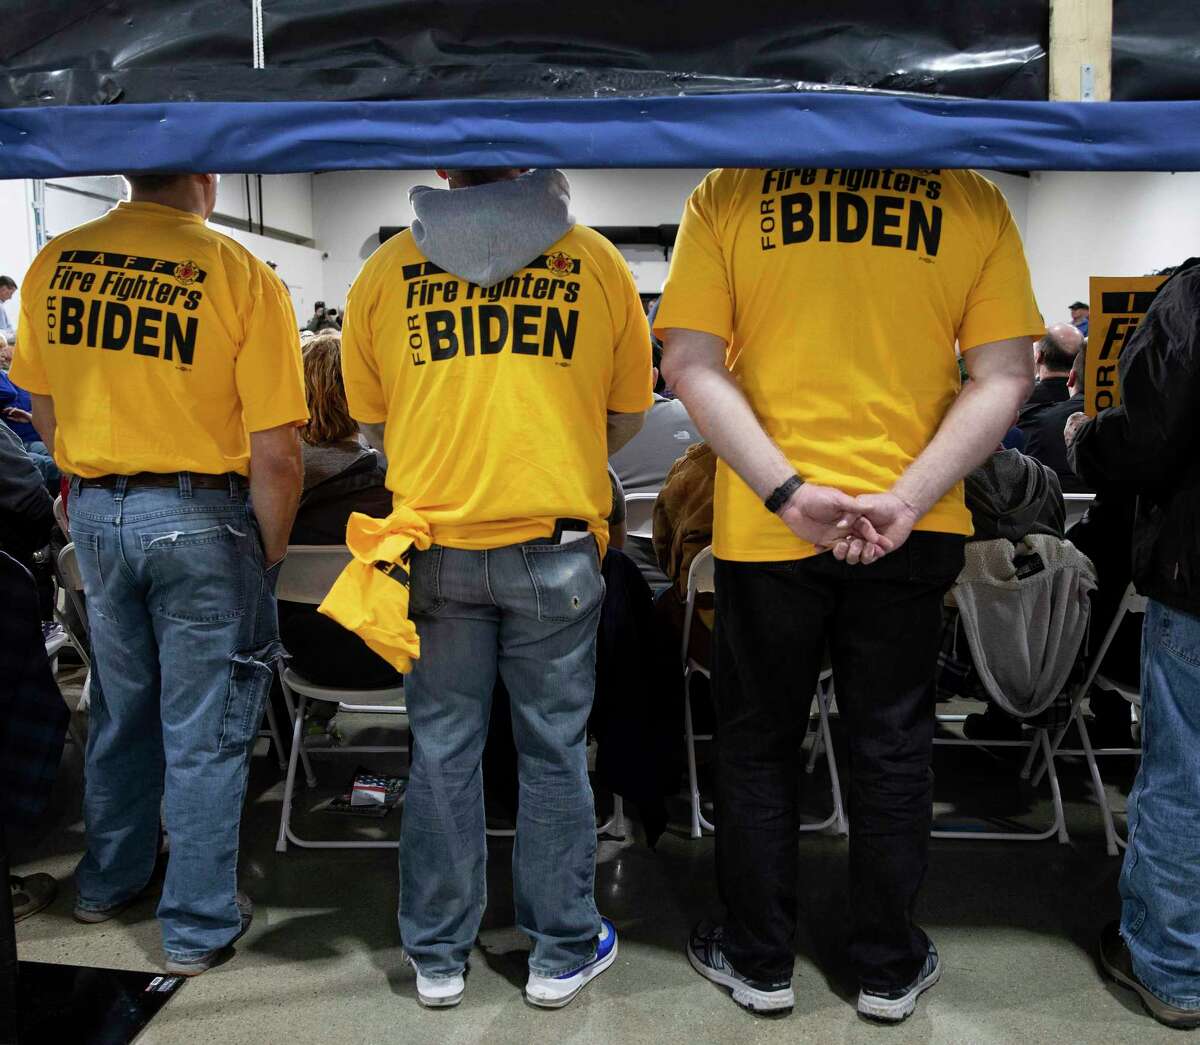 Supporters listen to former Vice President Joe Biden, a Democratic candidate for president, during a campaign event in Council Bluffs, Iowa on Wednesday, Jan. 29, 2020.